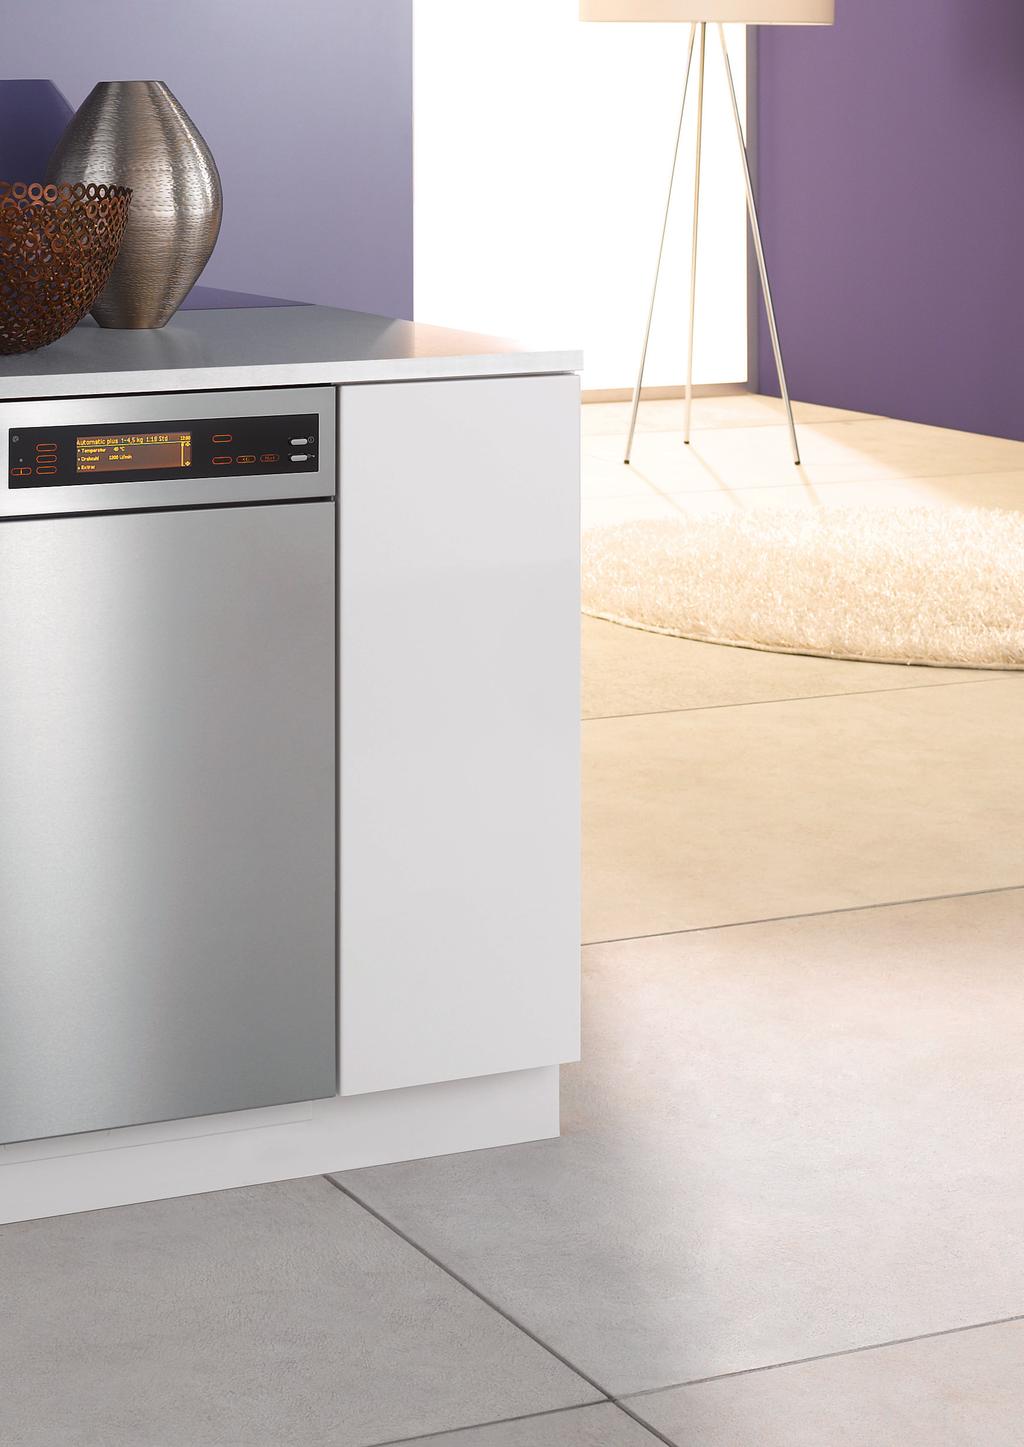 Miele offer a range of laundry appliances for integration into a run of kitchen units.